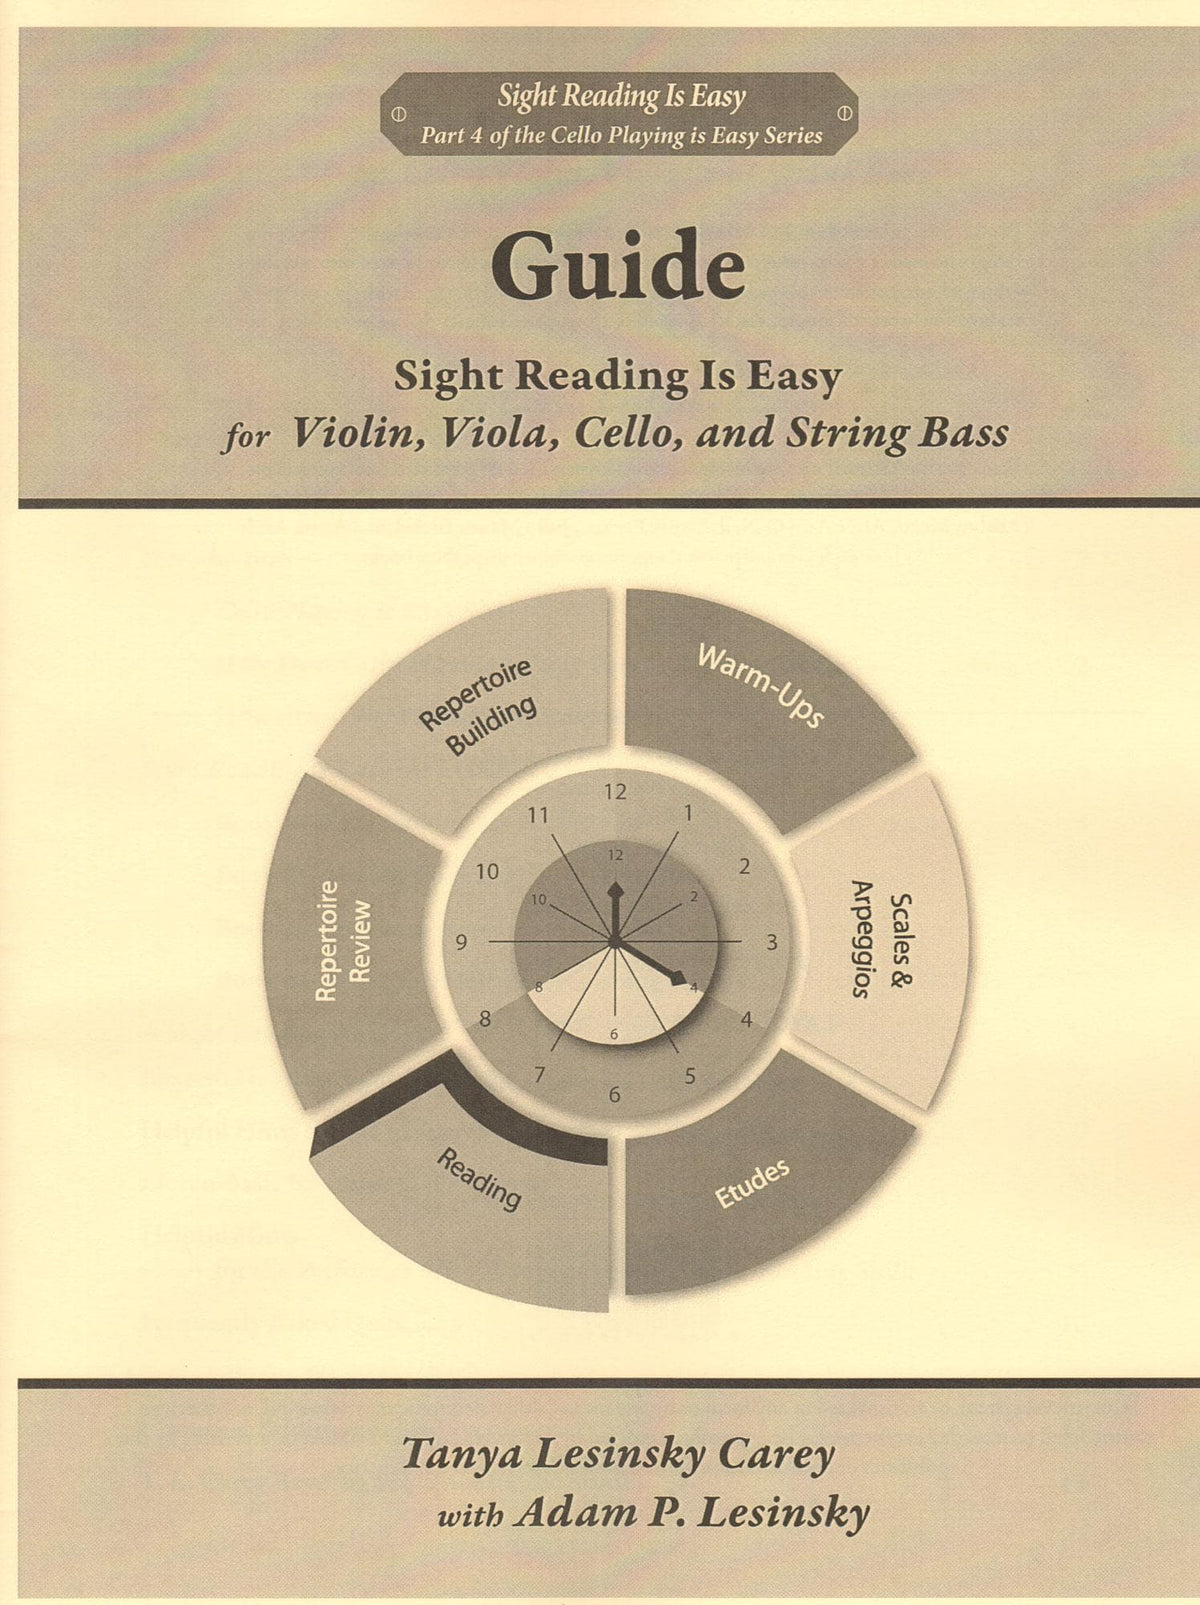 Sight Reading is Easy - for String Bass - by Tanya Lesinsky Carey and Adam P. Lesinsky